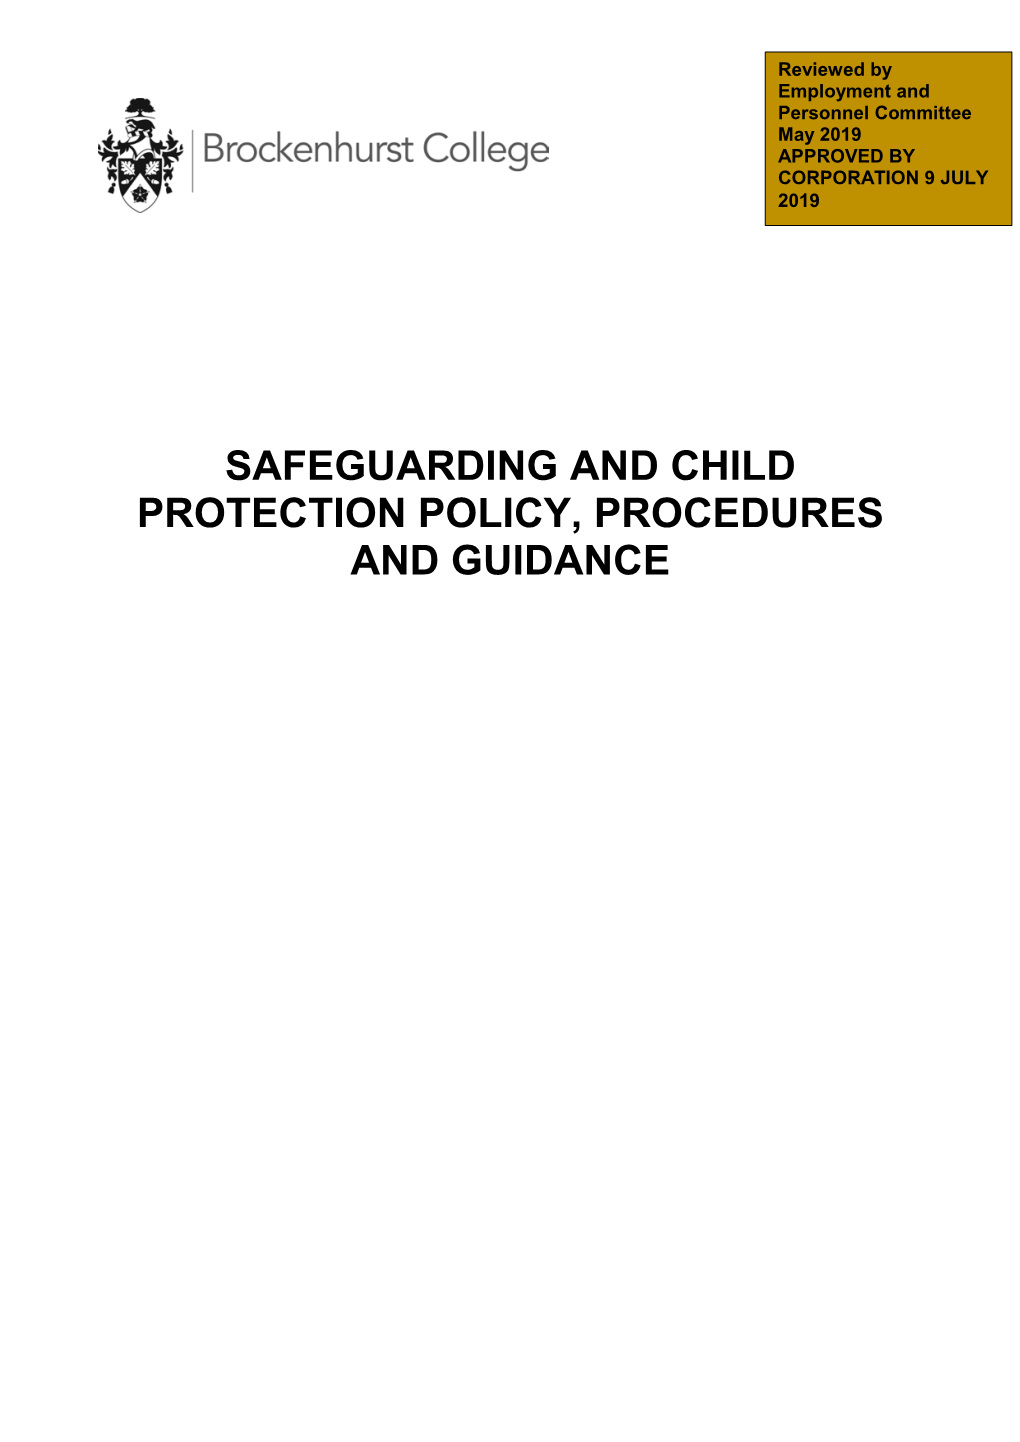 Safeguarding and Child Protection Policy, Procedures and Guidance